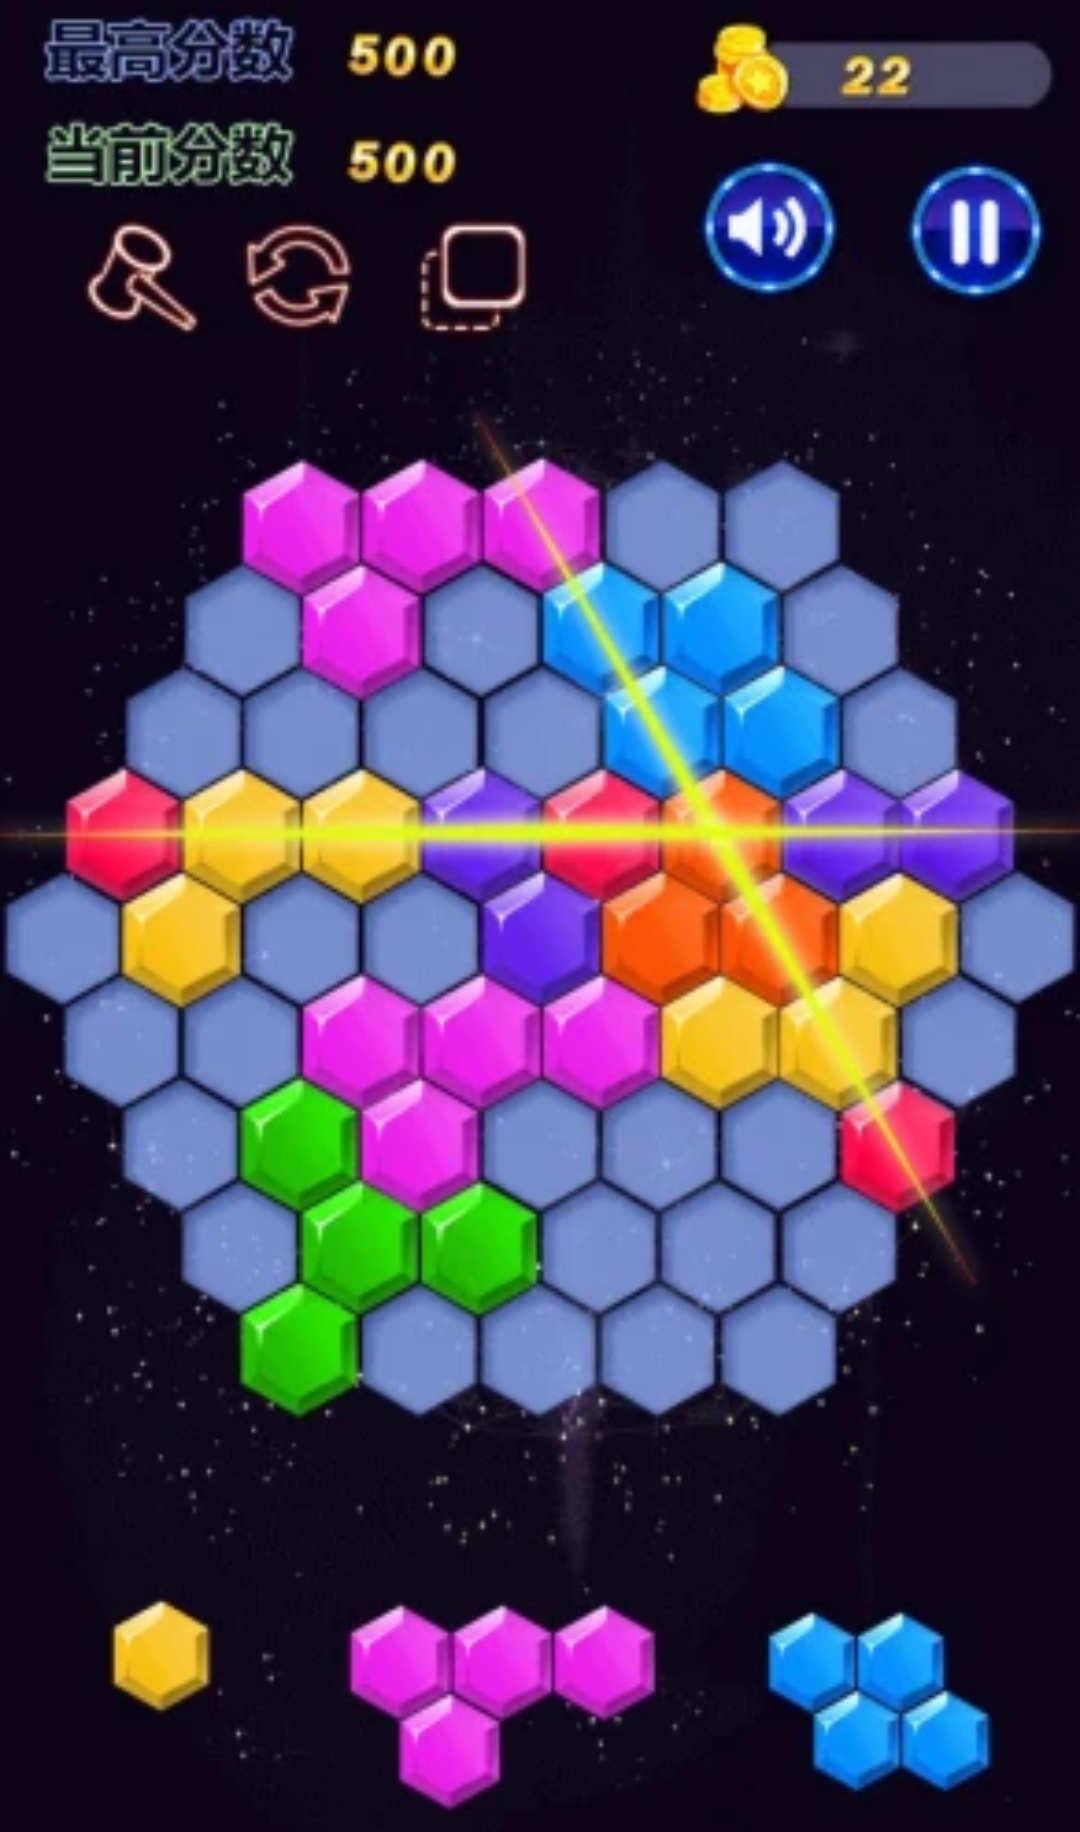  Download and install the hexagon Xiaoxiaole